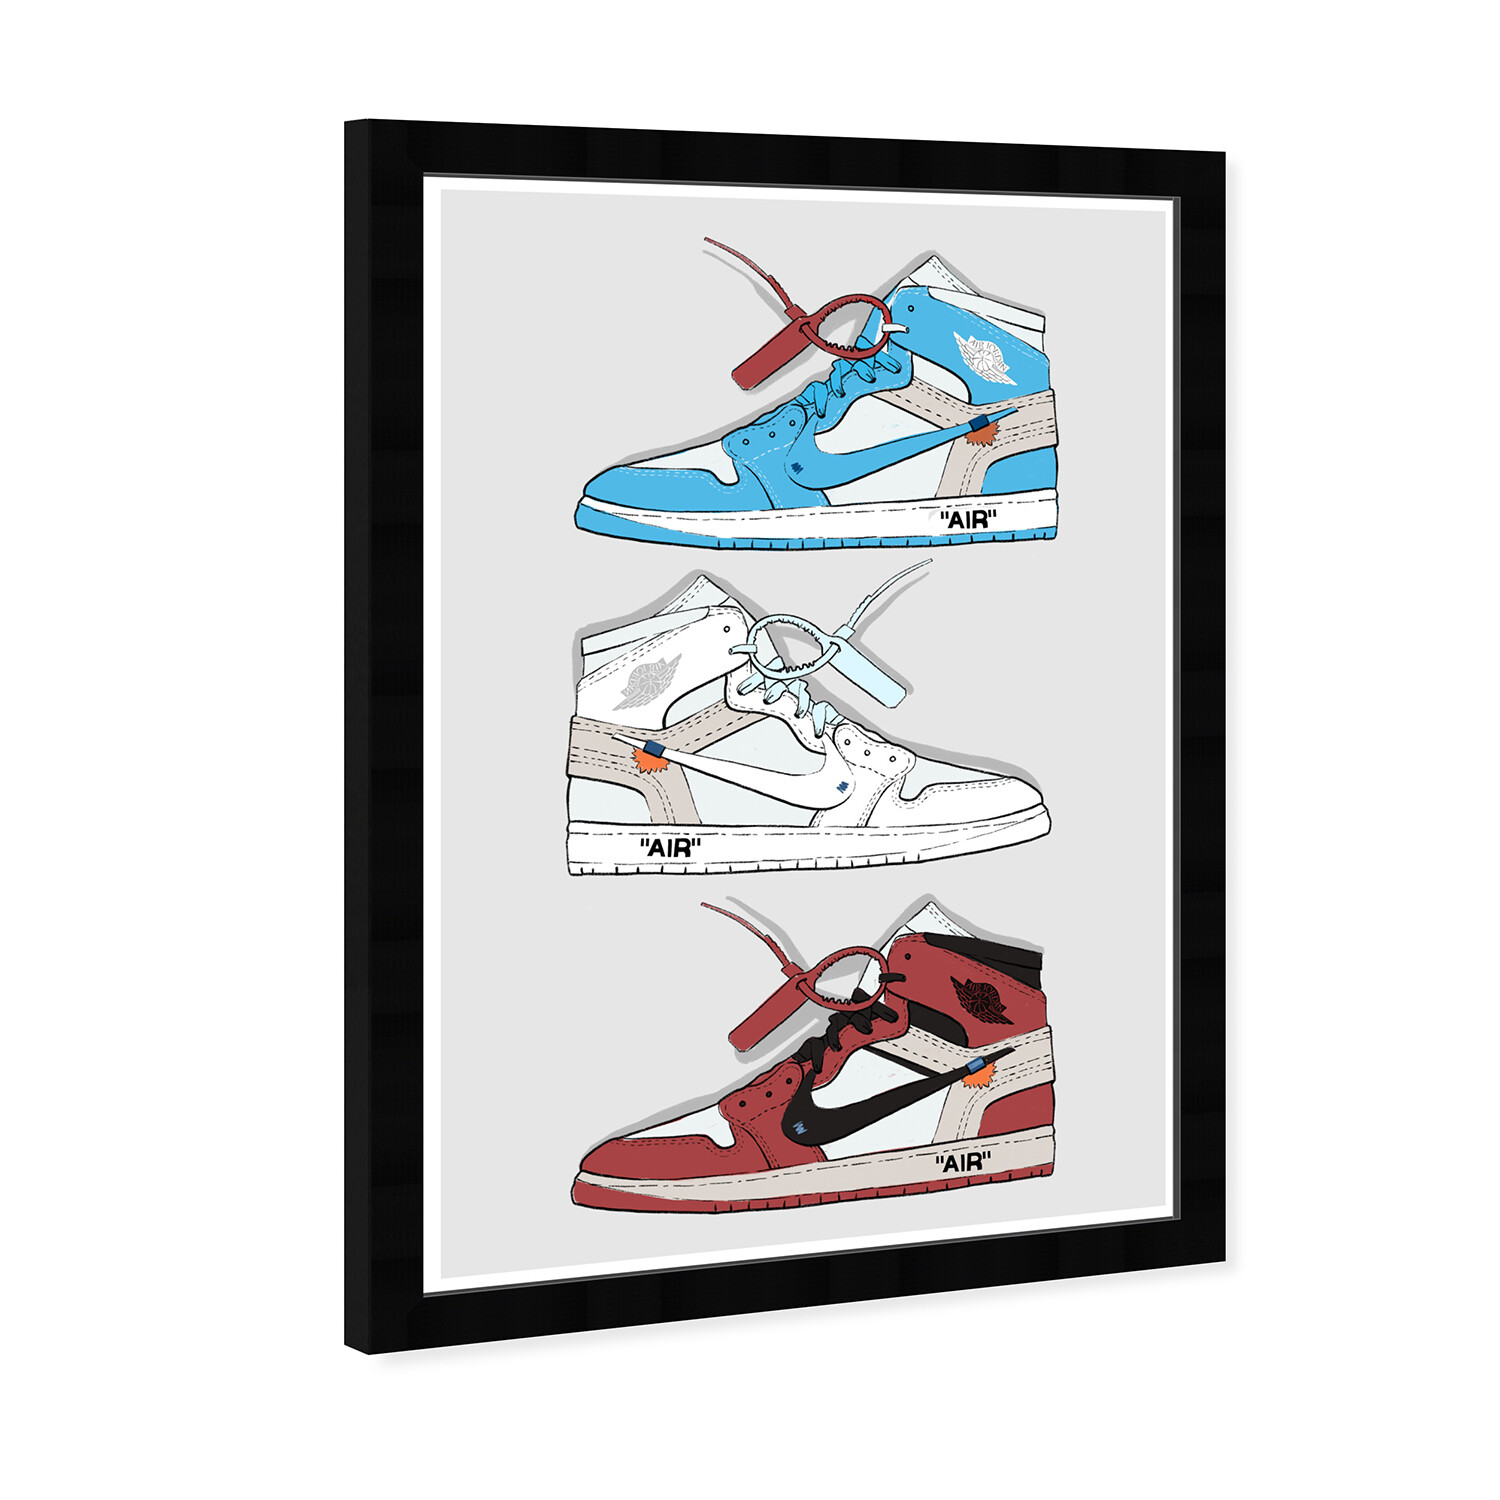 My Sneaker Collection (Black Frame) - Sneaker Themed Prints - Touch of ...